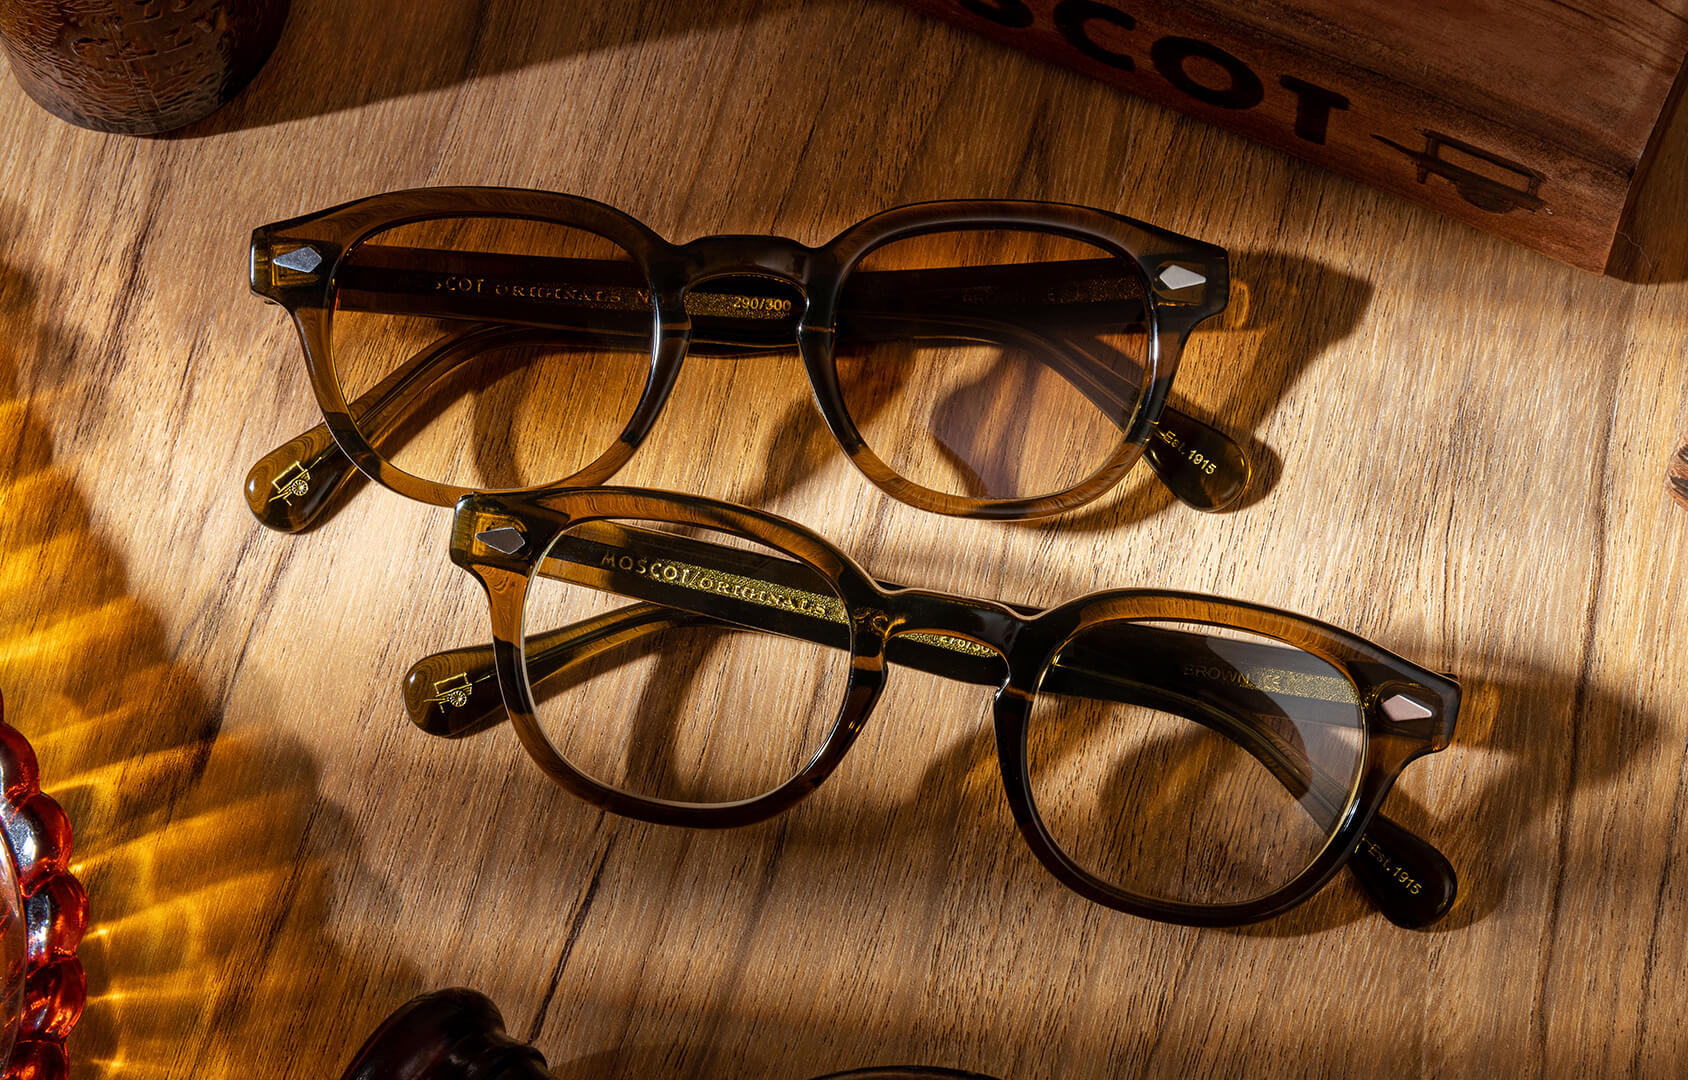 Shop The LEMTOSH Limited Edition, available in sun and optical.